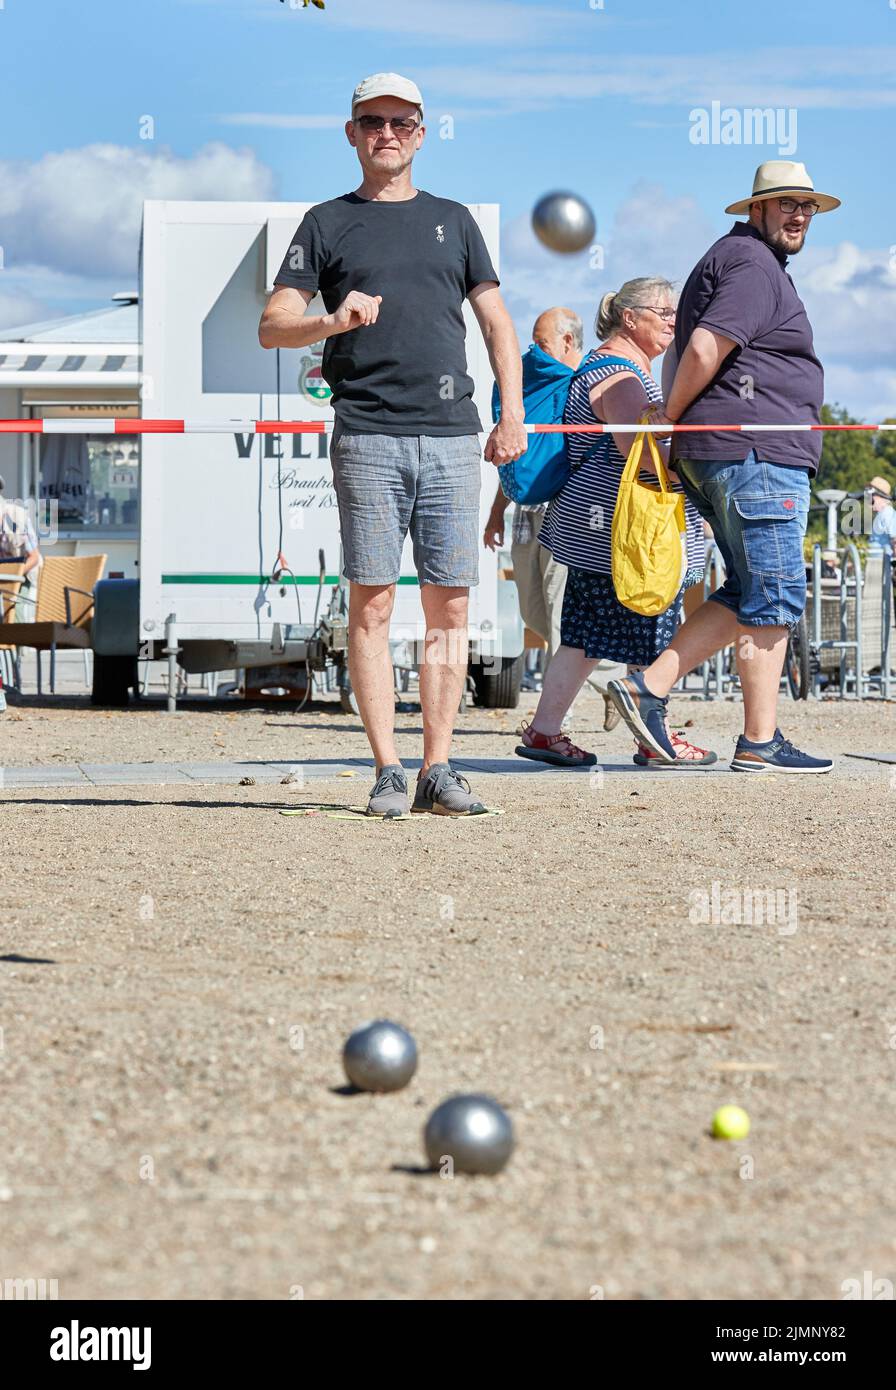 07 August 2022, Schleswig-Holstein, Lübeck: Sönke Backens (l), women's coach from Freiburg, throws a ball on the beach promenade. The Holstentor tournament is considered the largest German boules tournament. Photo: Georg Wendt/dpa Stock Photo